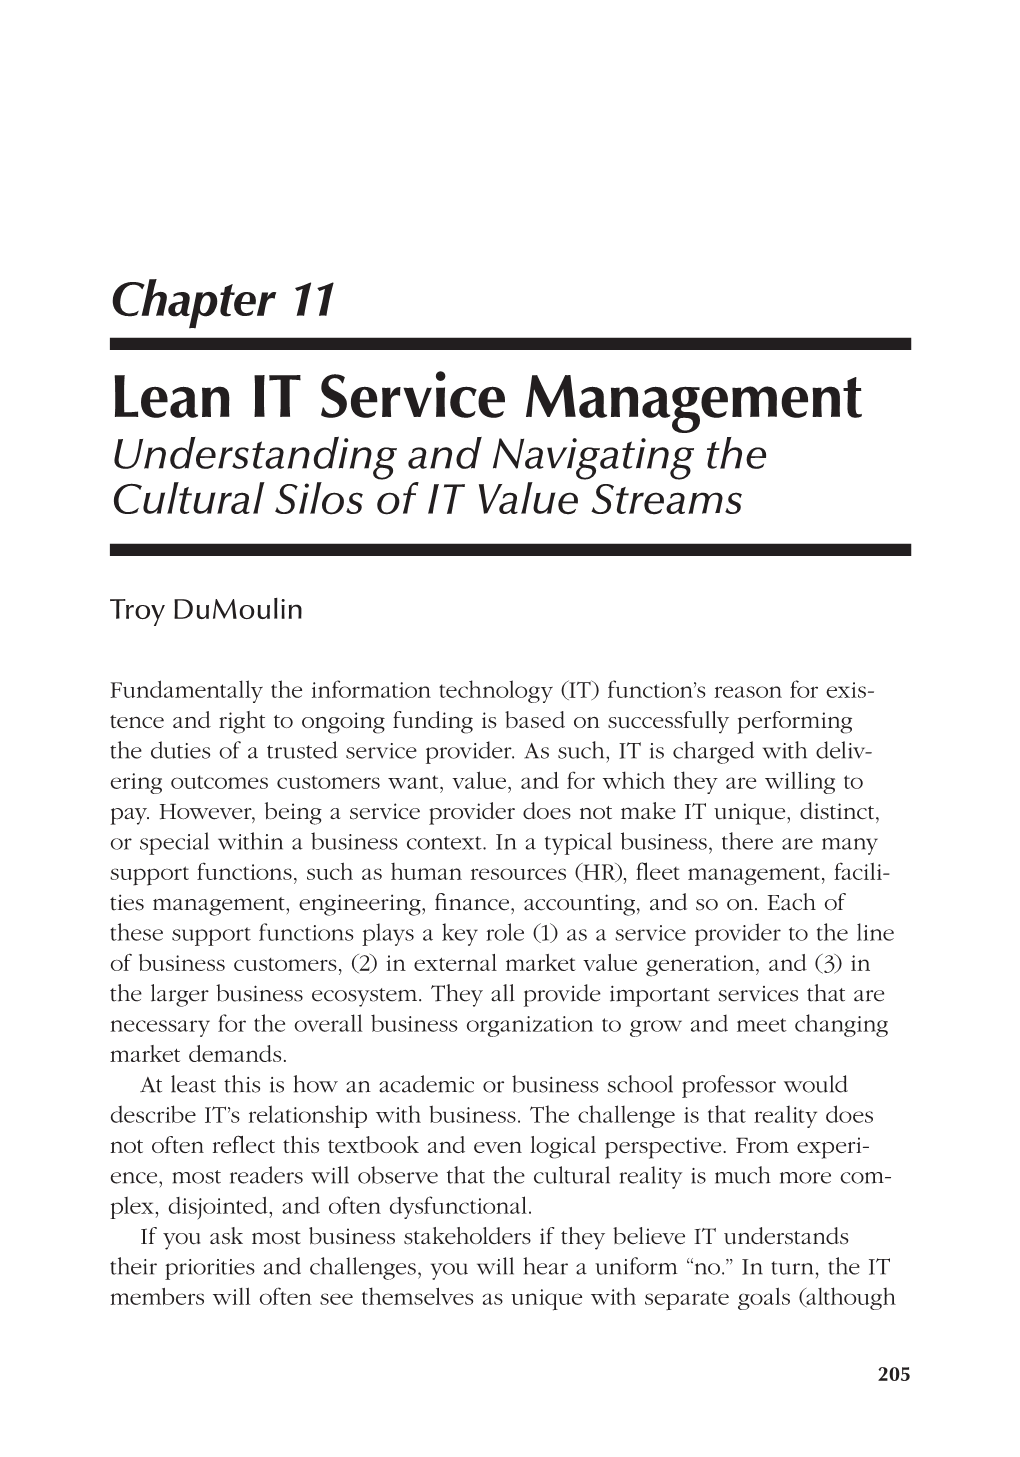 Lean IT Service Management Understanding and Navigating the Cultural Silos of IT Value Streams